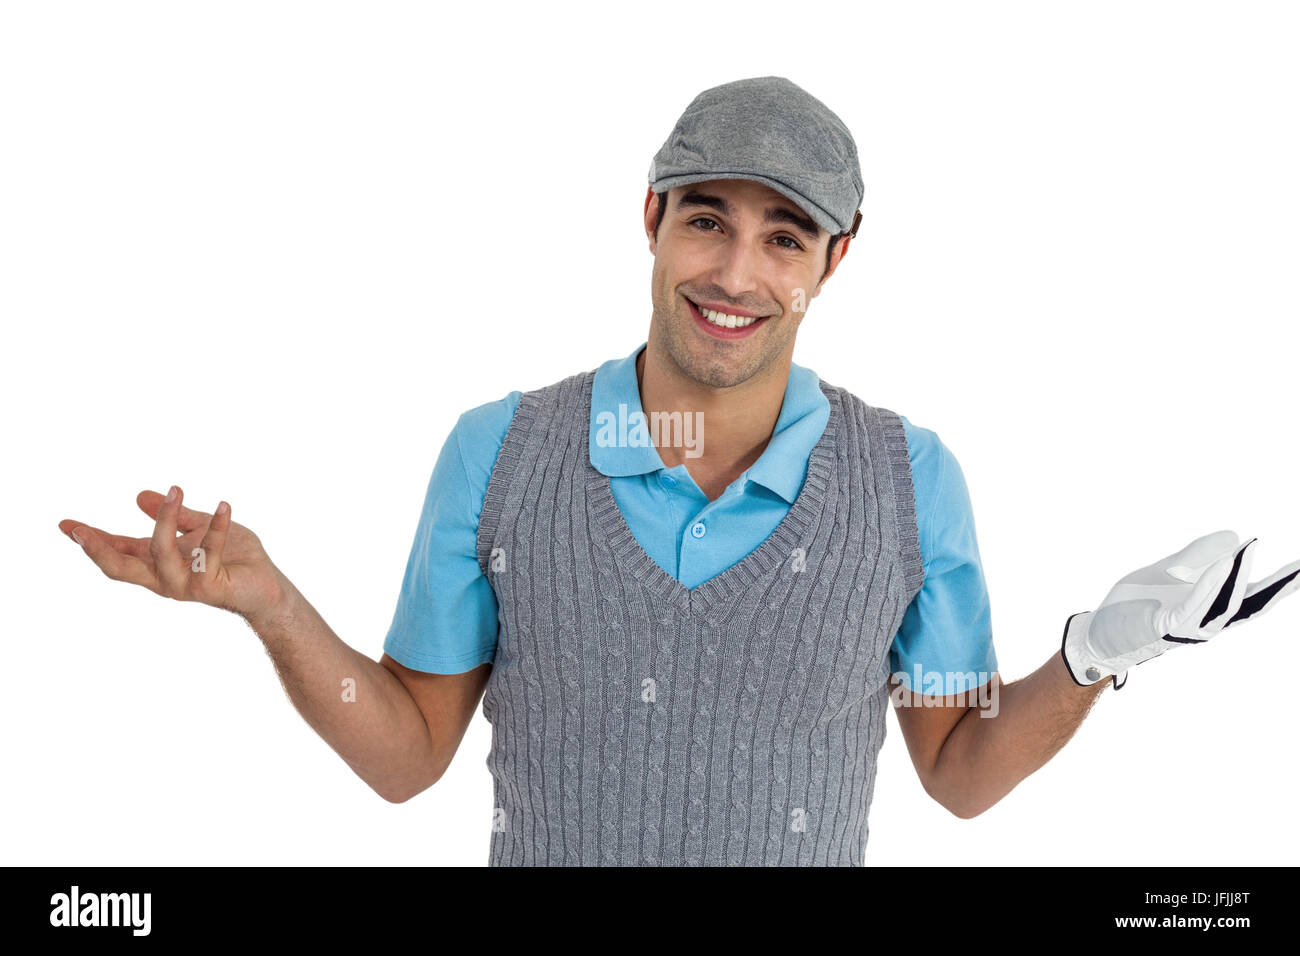 Confident golf player posing on white background Stock Photo